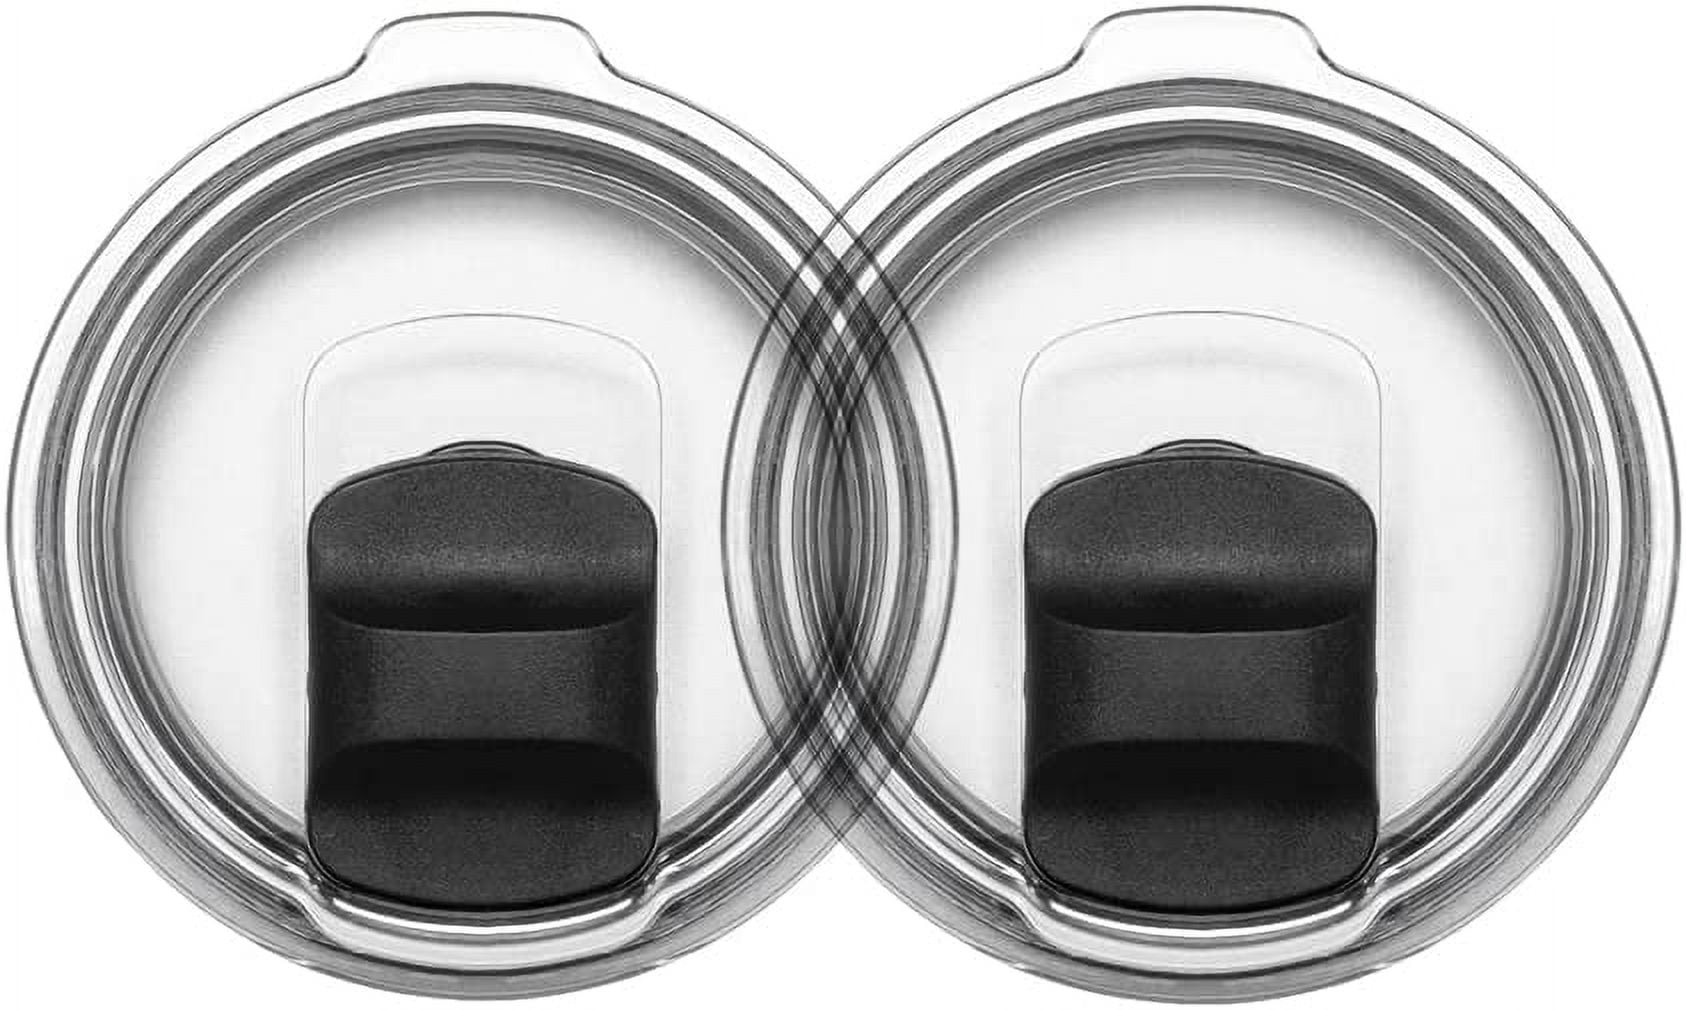 2 Pack 30oz Magnetic Tumbler Lid, Fits Yeti Rambler or Old Style RTIC Coffee Tumbler - Replacement for Spillproof Ozark Trail Lids, Magnetic Slider